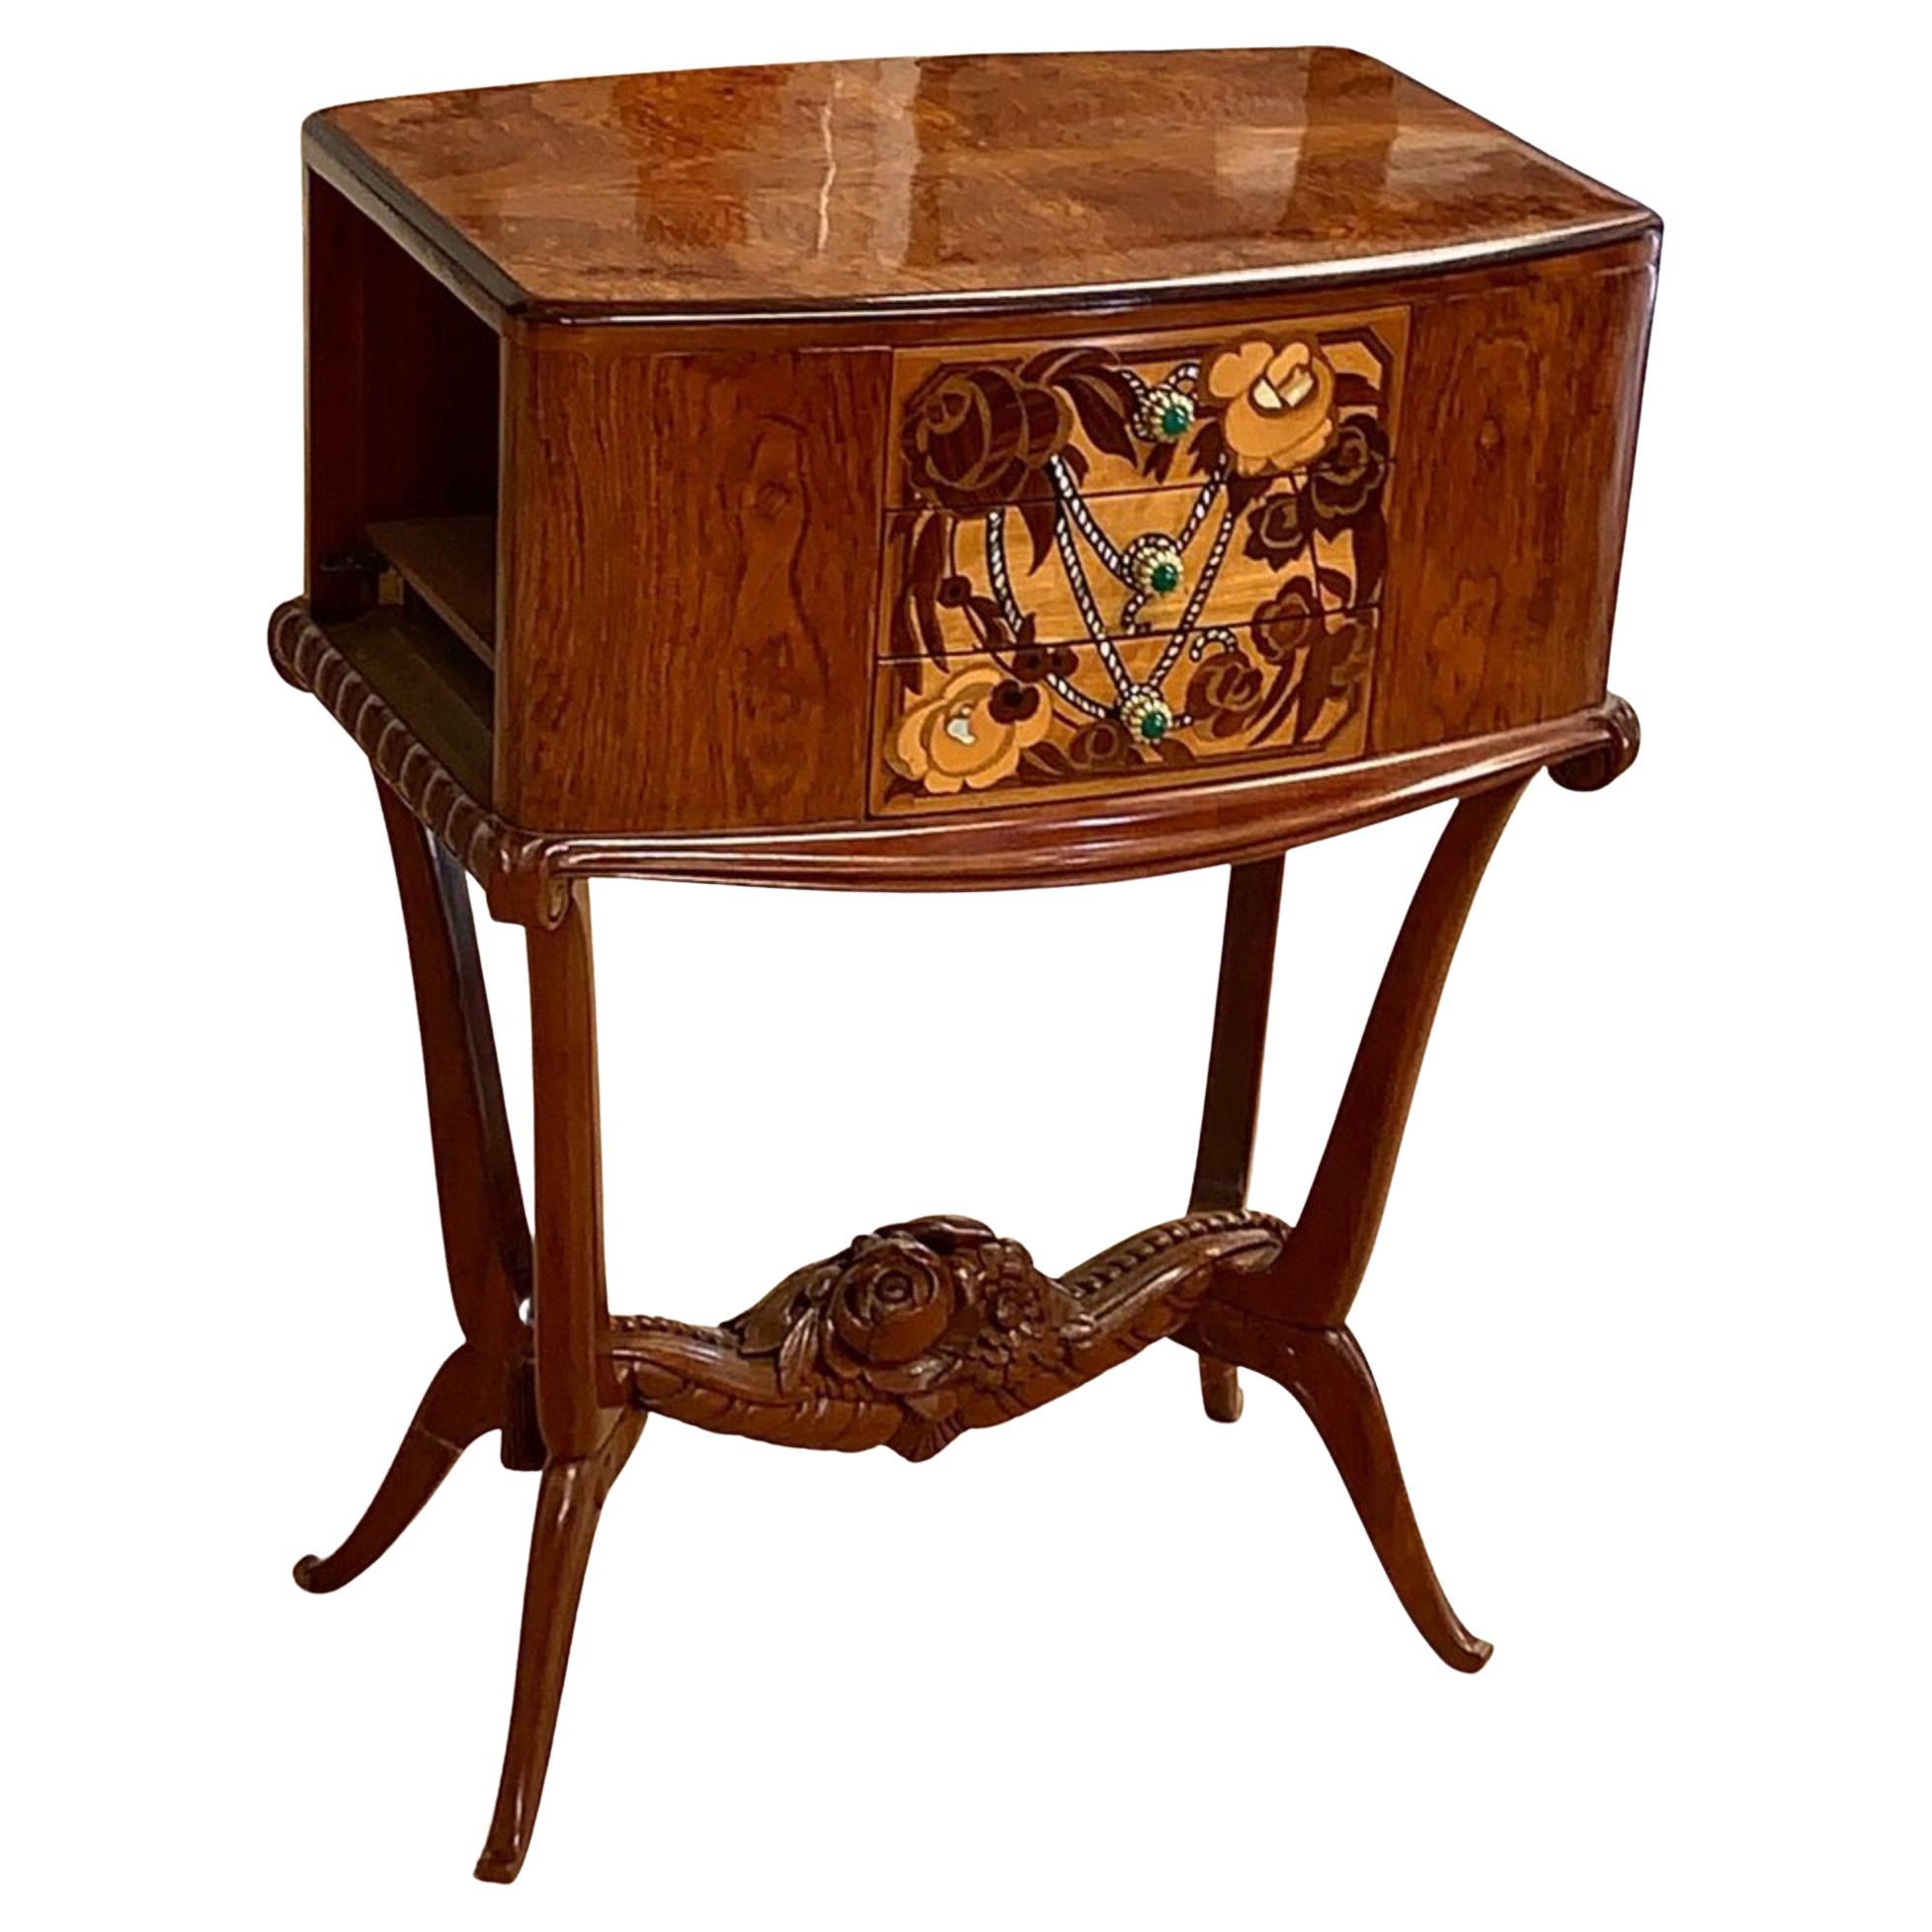 Lahalle et Levard Side Table/Small Cabinet with Marquetry Drawers